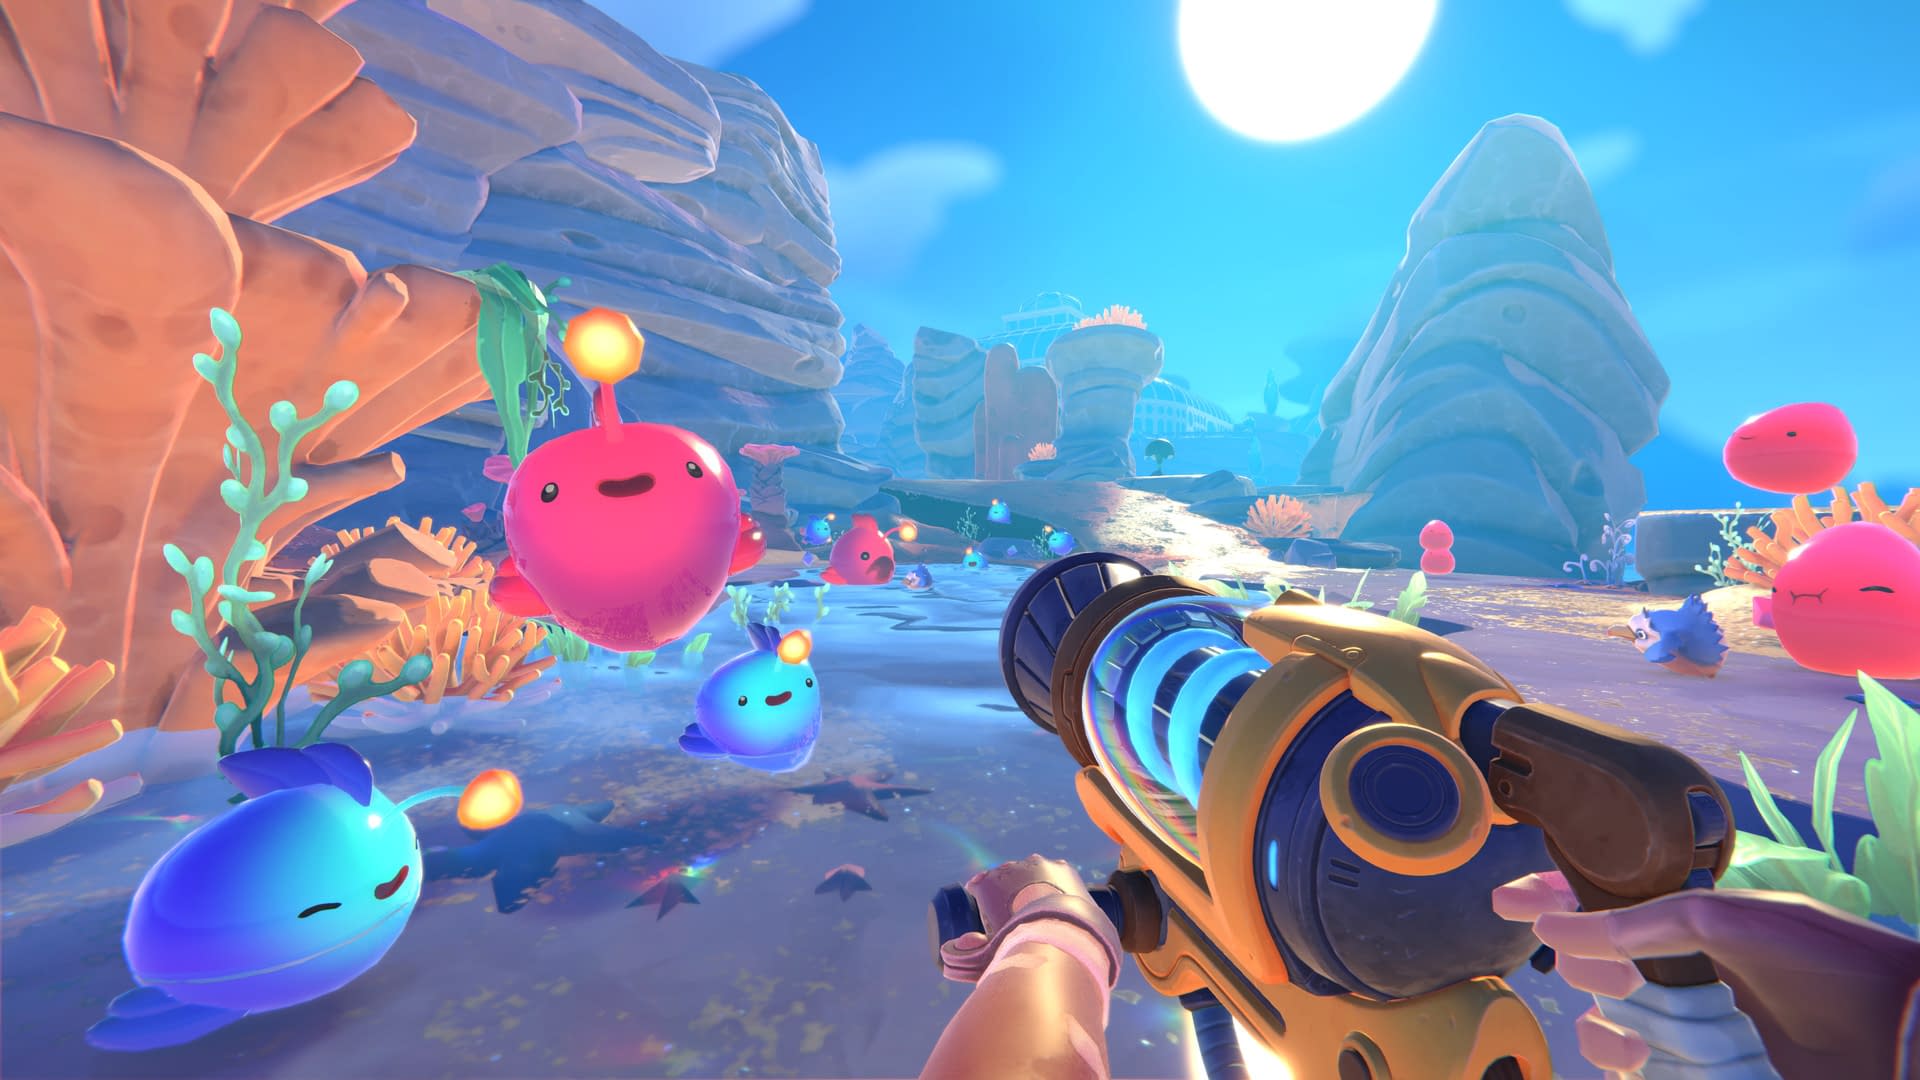 Slime Rancher 2 Sales Reach 100K Units in 6 Hours